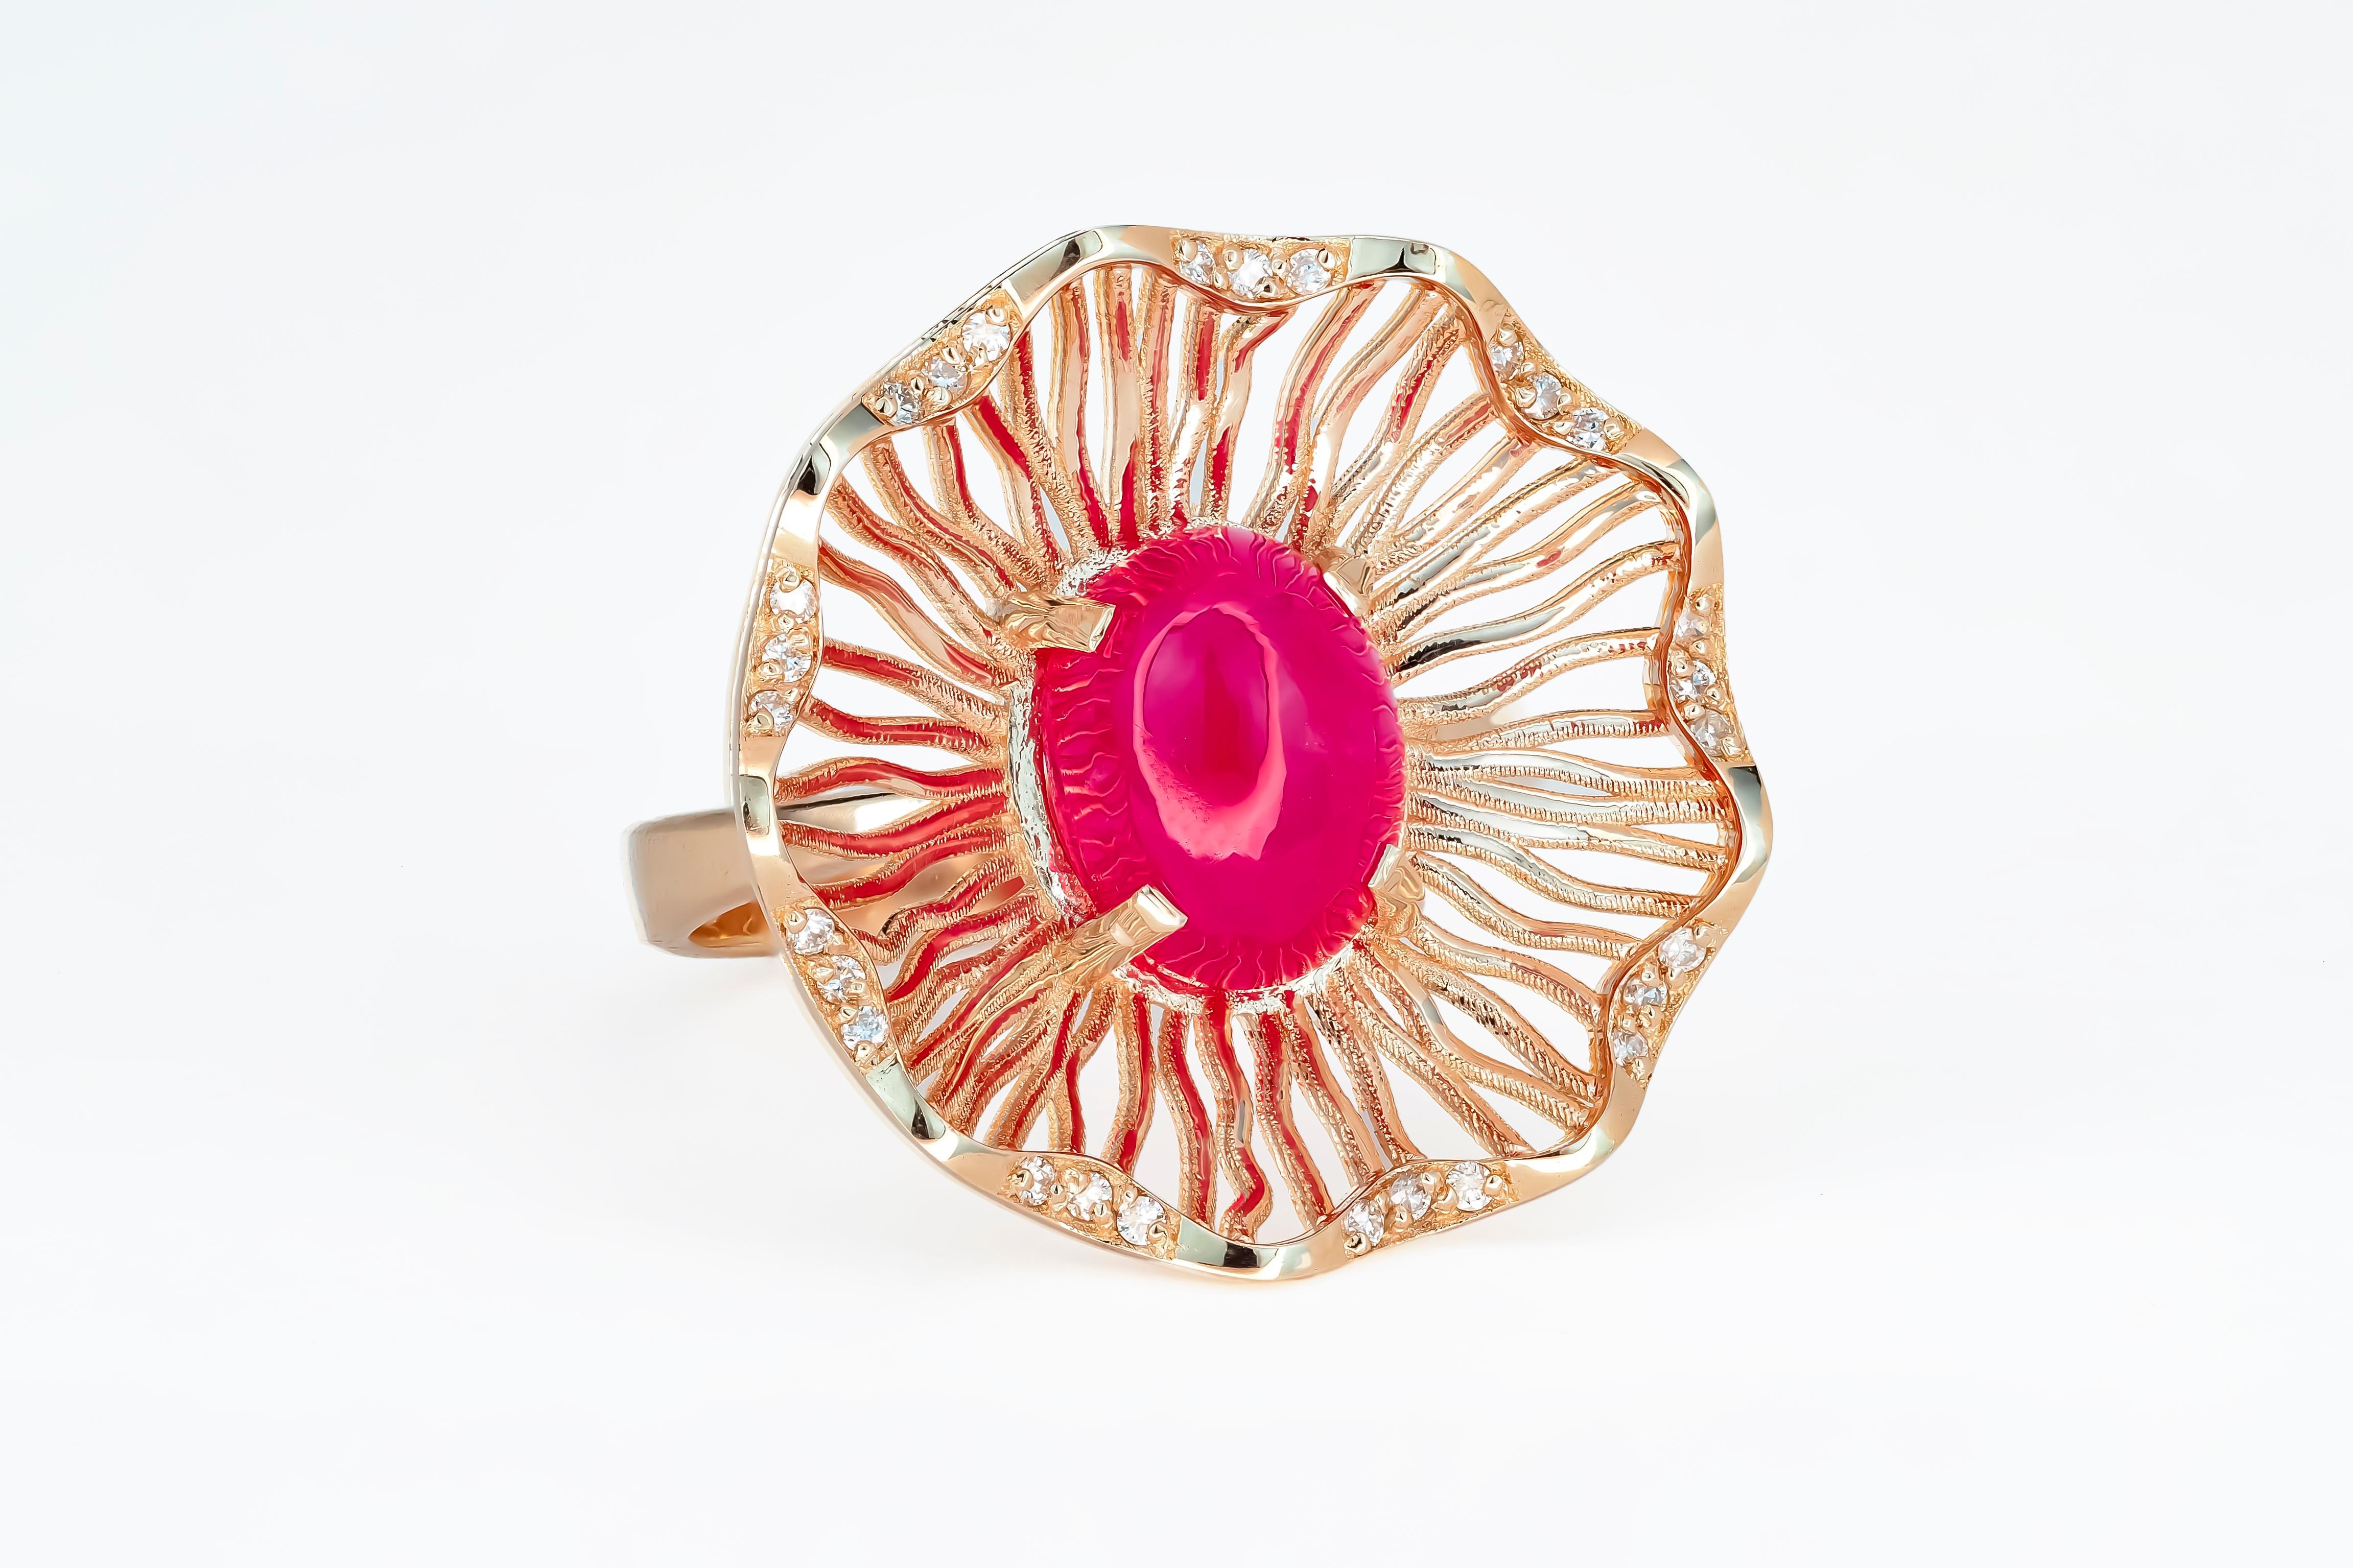 Pink Gold Ring with Ruby and Diamonds, Vintage Style Ring with Ruby Cabochon 6